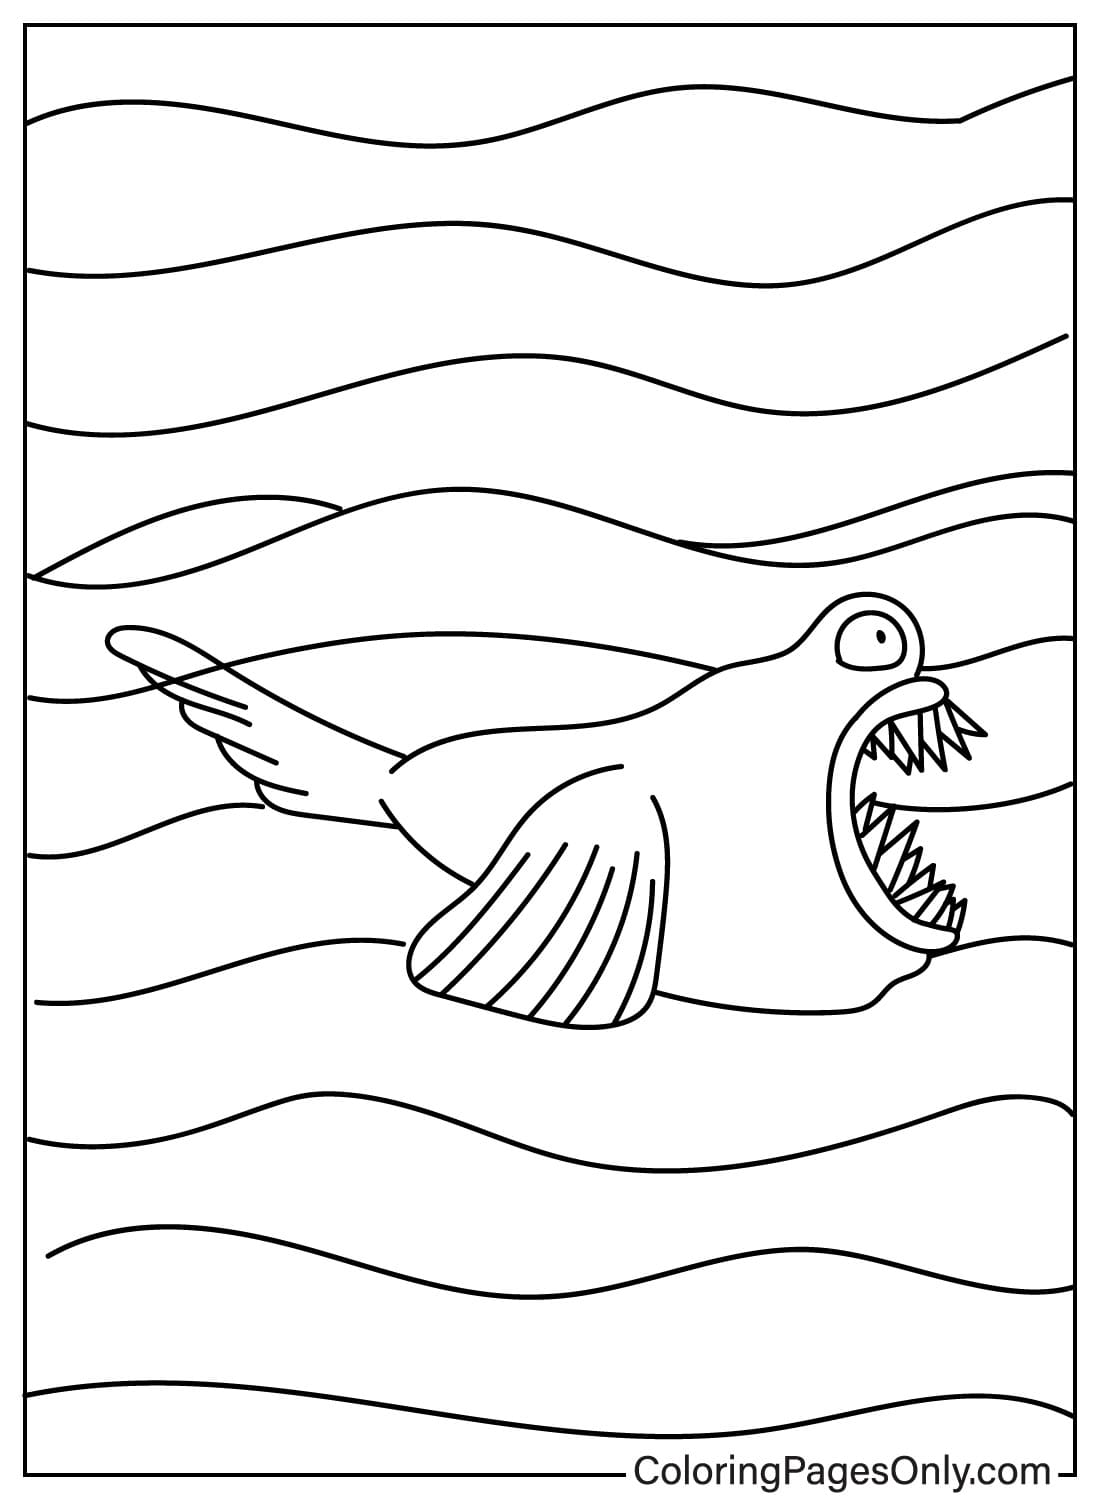 Pictures Zoonomaly Coloring Page - Free Printable Coloring Pages